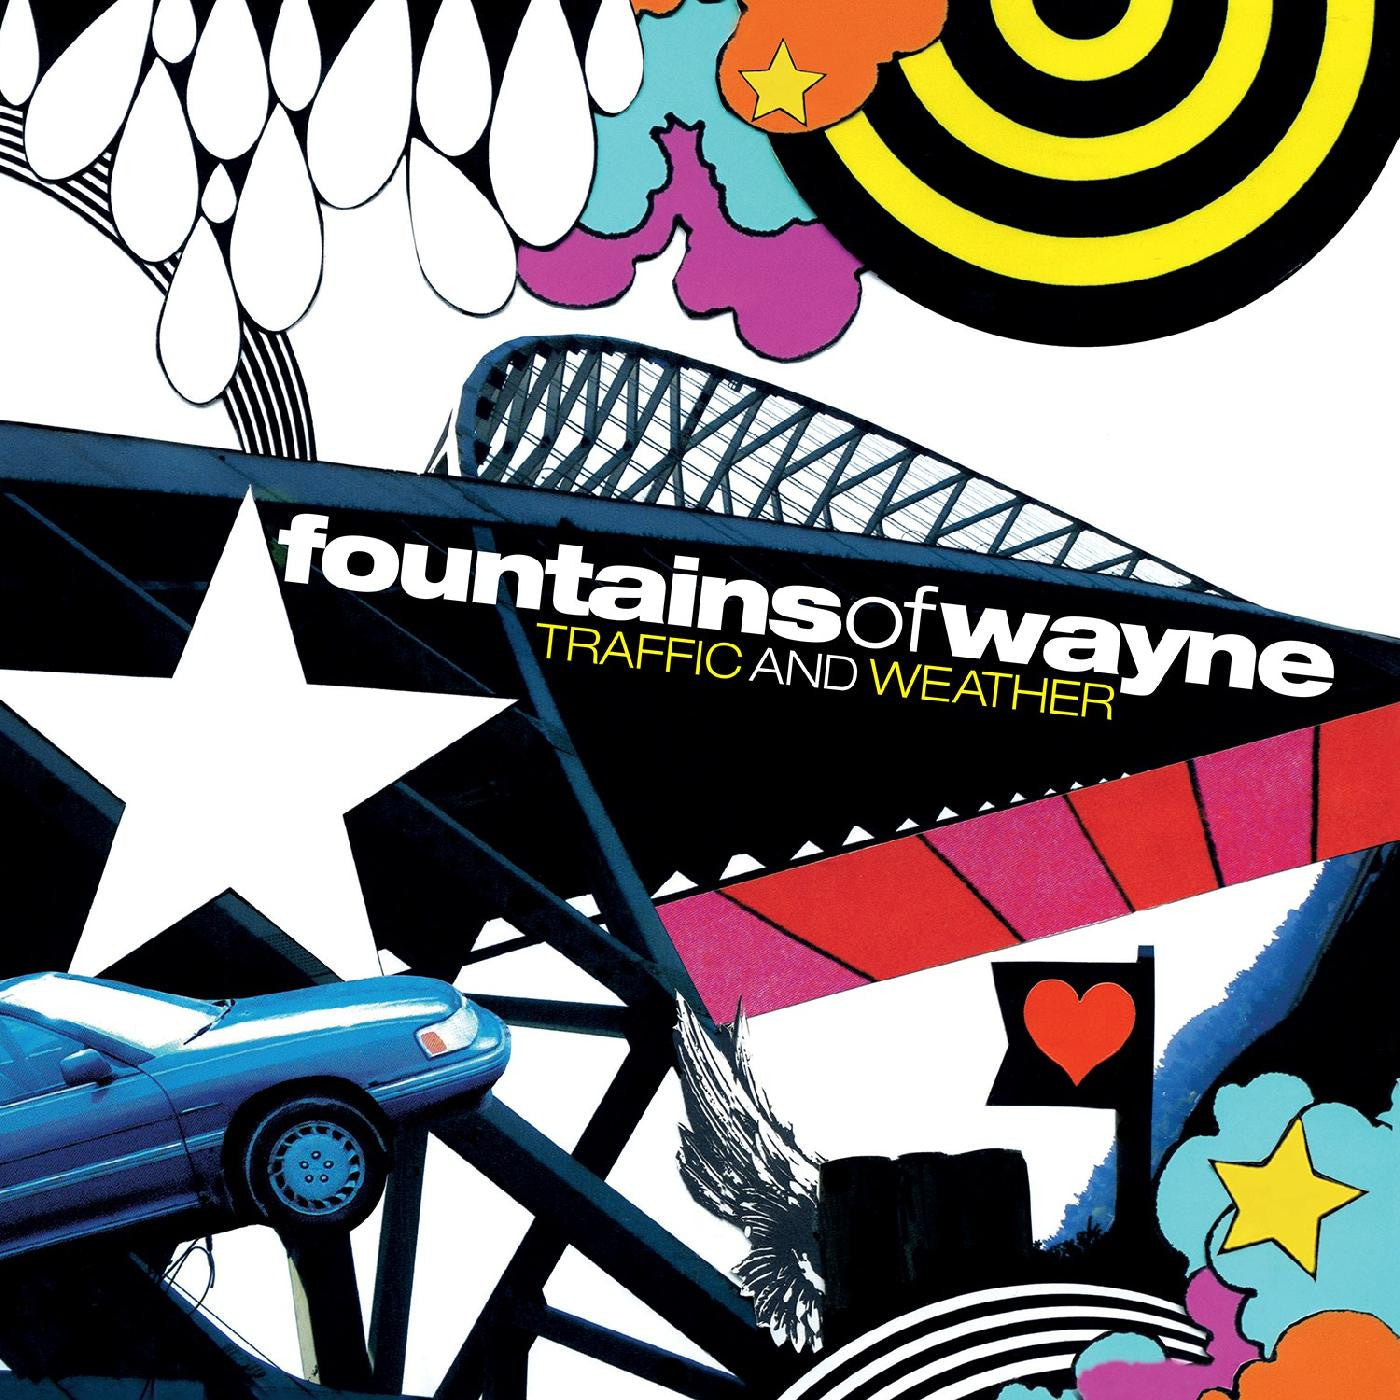 Fountains of Wayne - Traffic and Weather (Vinyl LP)